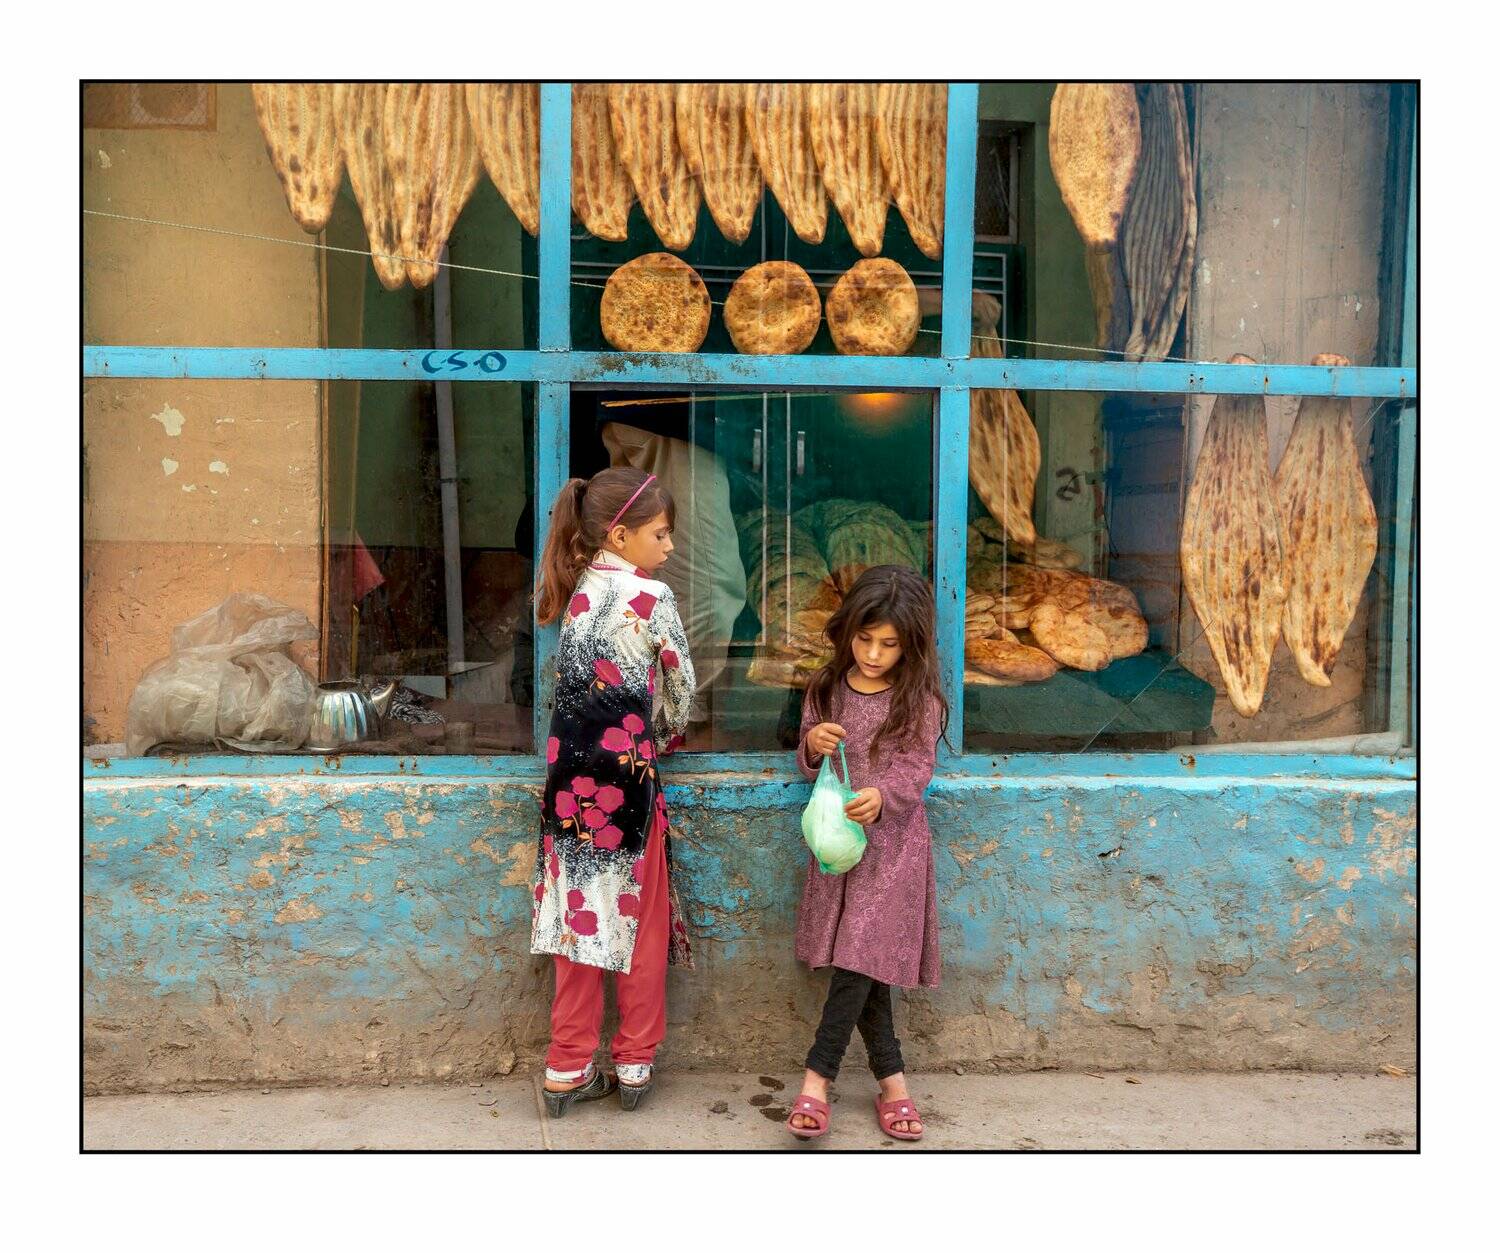 Girls in front of bakery. Photo by James Longley.